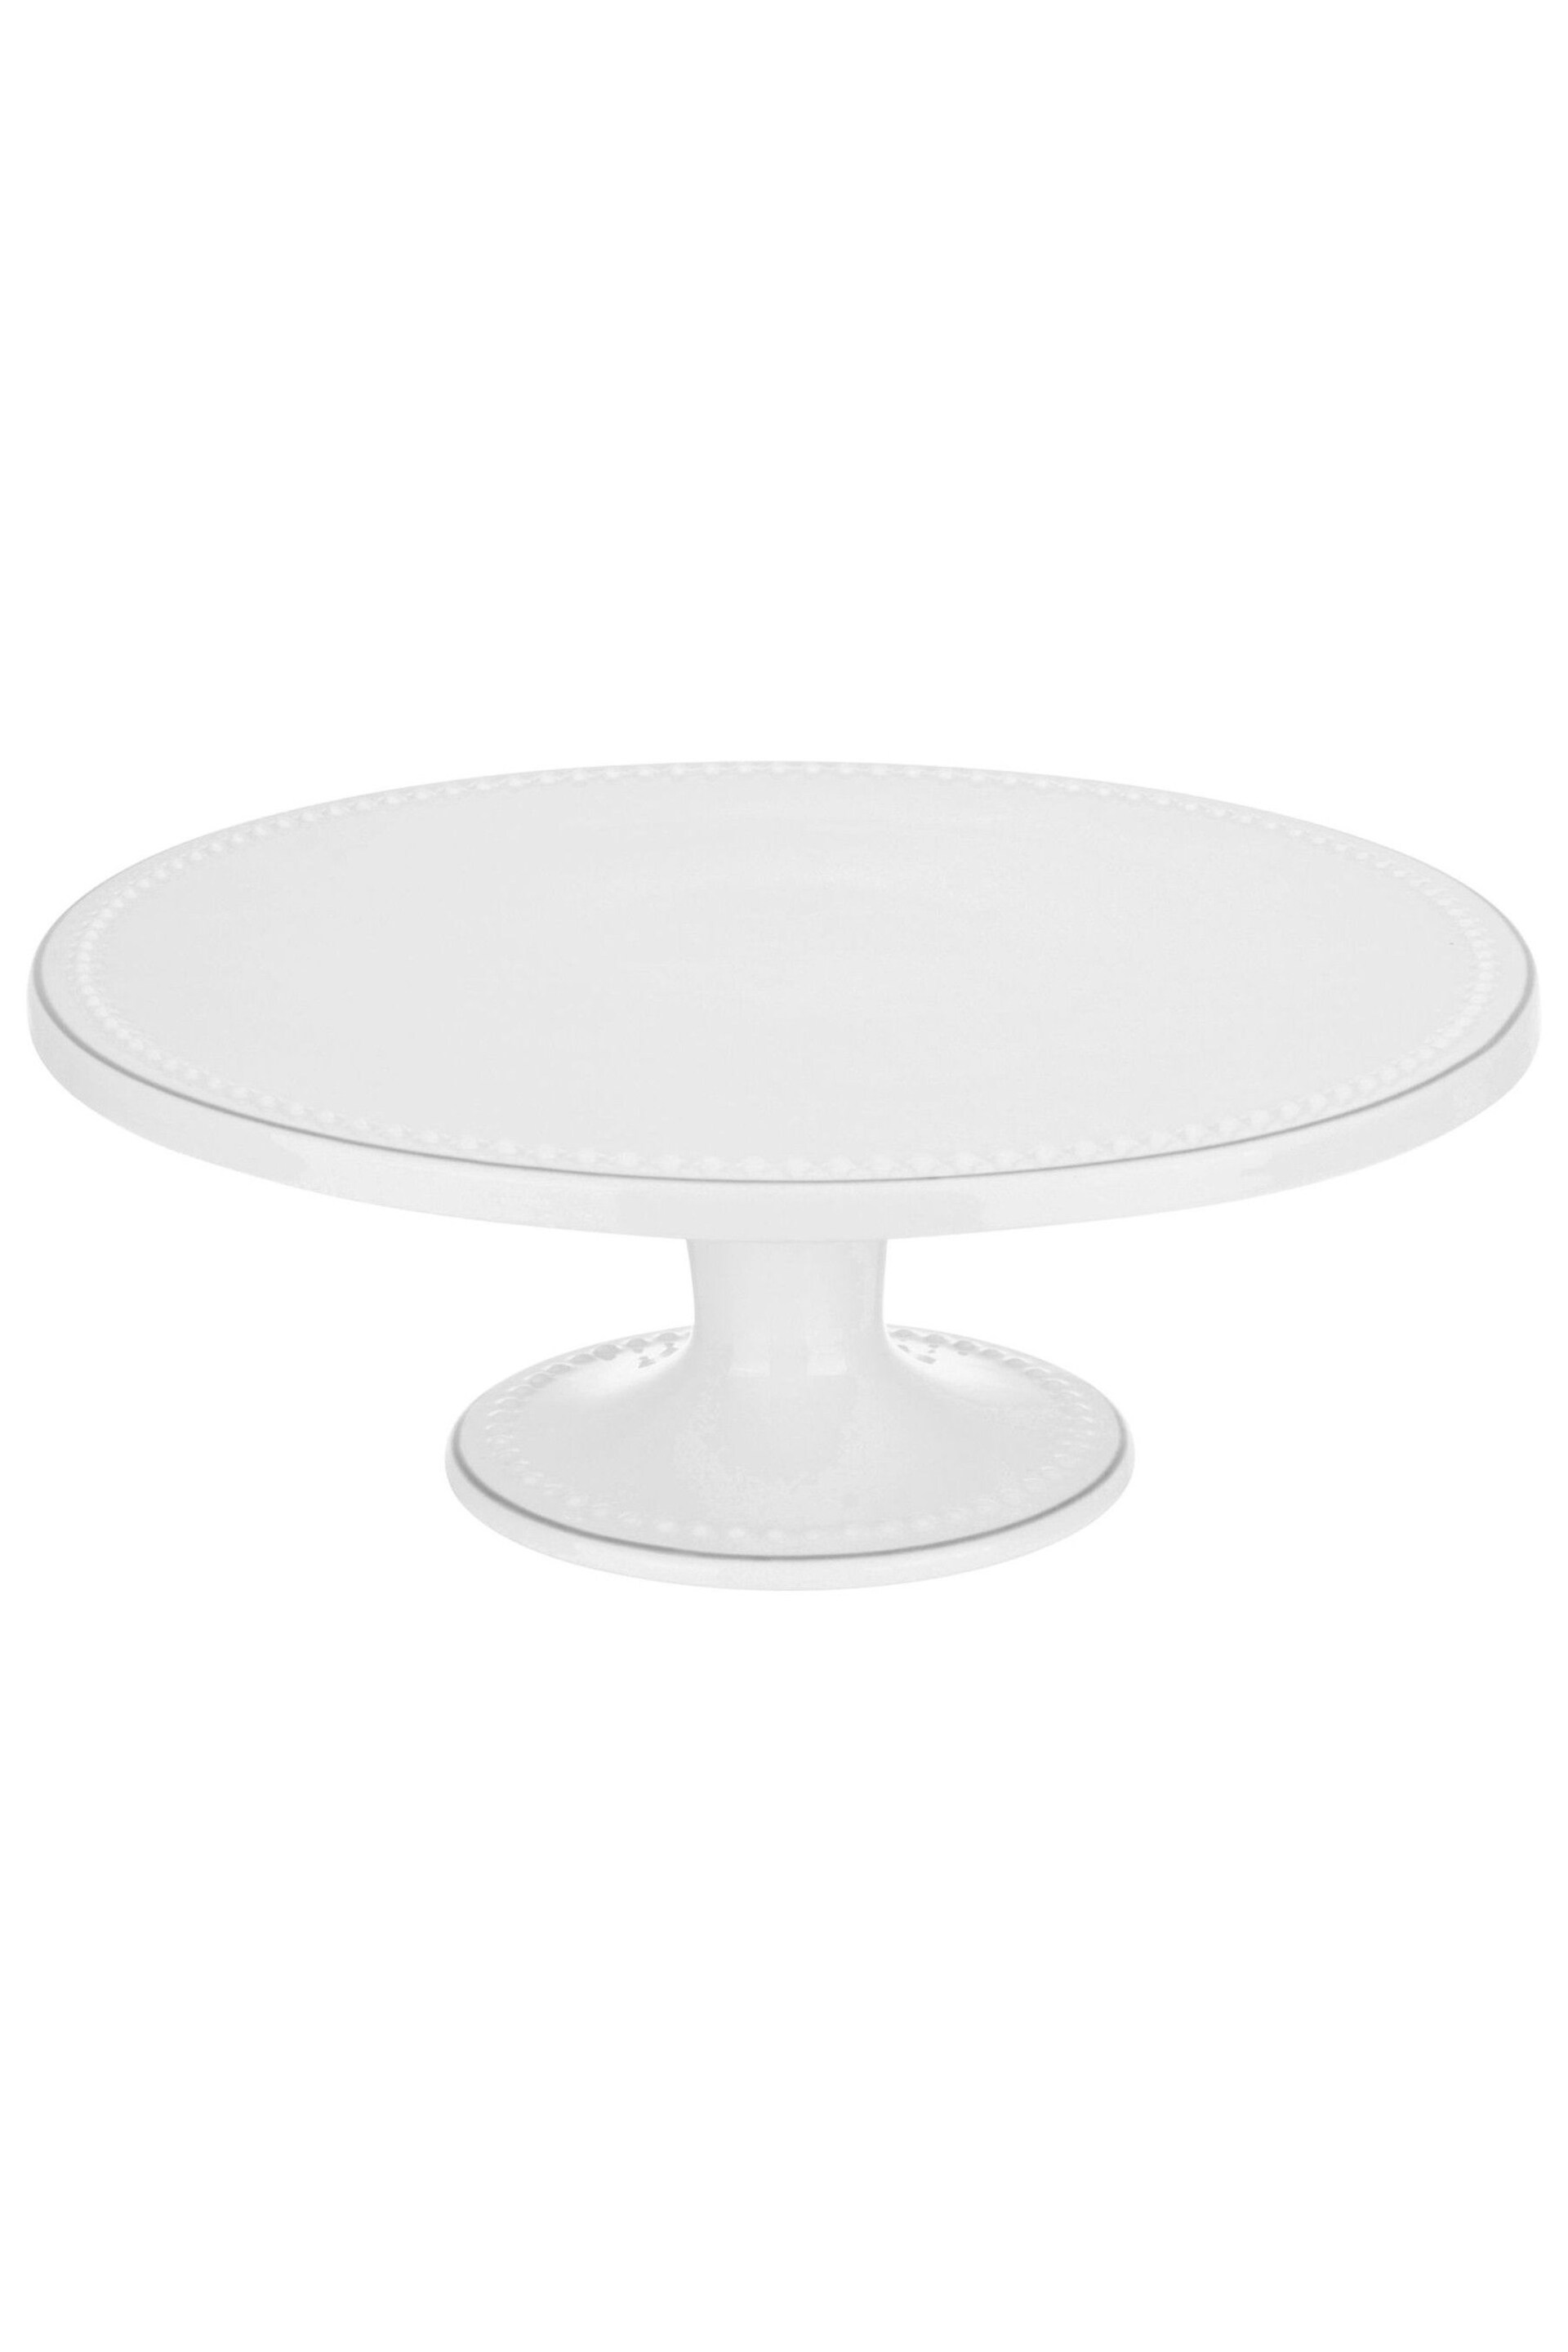 Mary Berry White Signature Cake Stand - Image 2 of 3